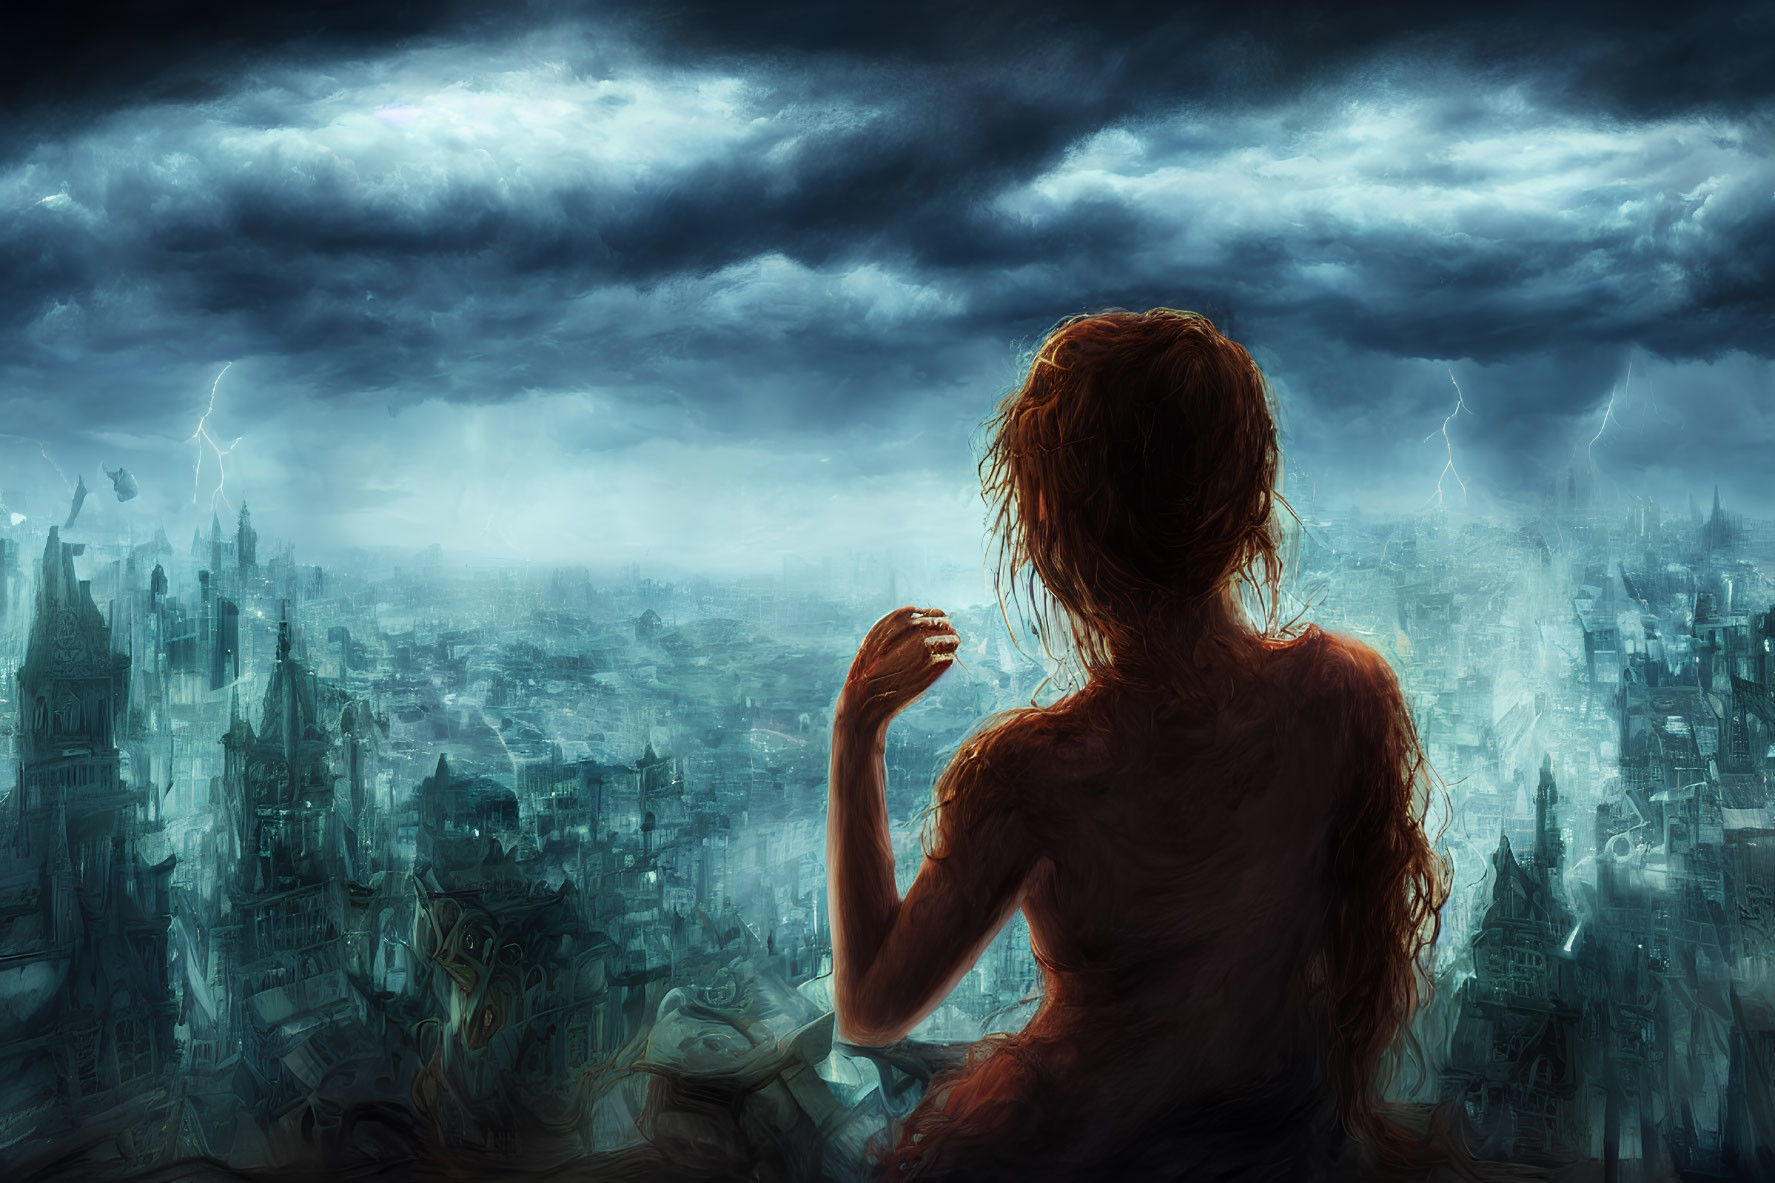 Person with flowing hair overlooking stormy cityscape from high vantage point